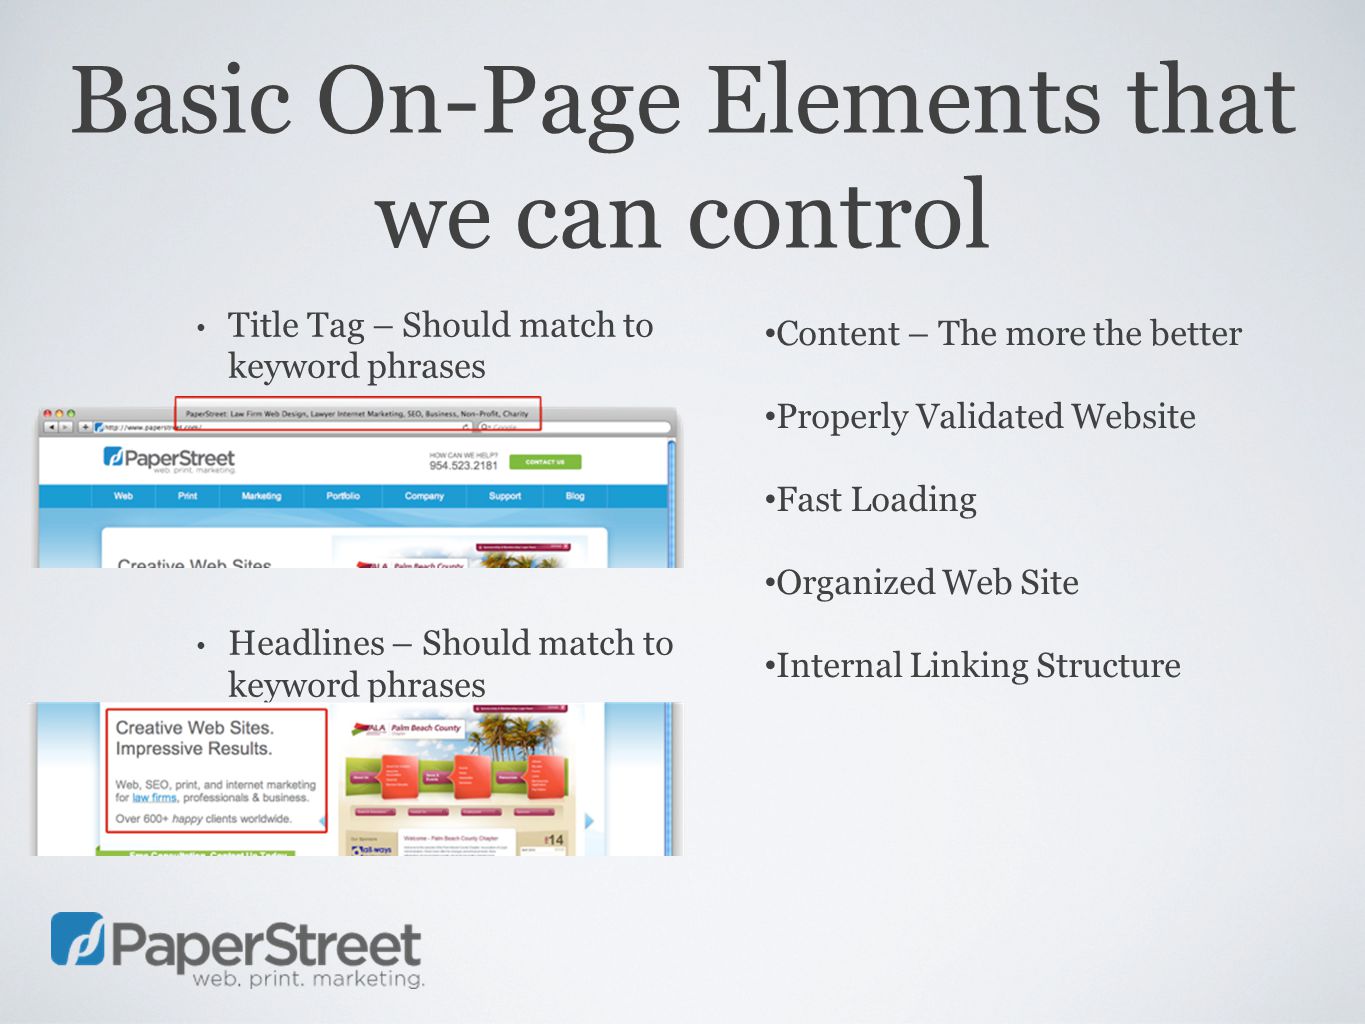 Basic On-Page Elements that we can control Title Tag – Should match to keyword phrases Headlines – Should match to keyword phrases Content – The more the better Properly Validated Website Fast Loading Organized Web Site Internal Linking Structure